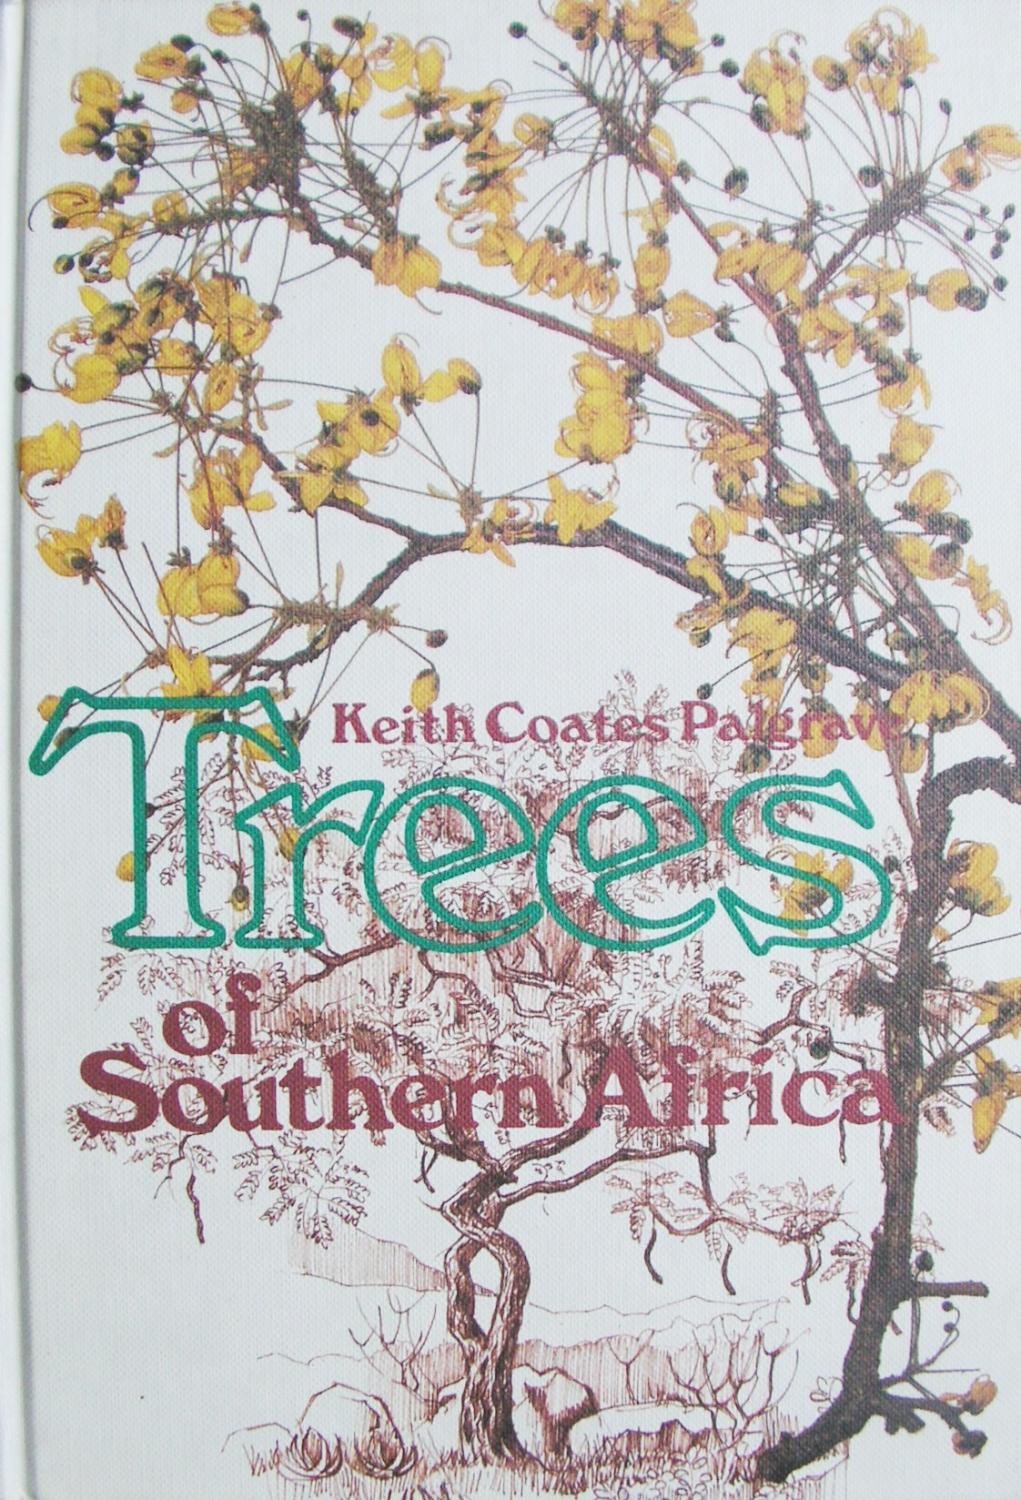 Trees of Southern Africa - Palgrave, Keith Coates